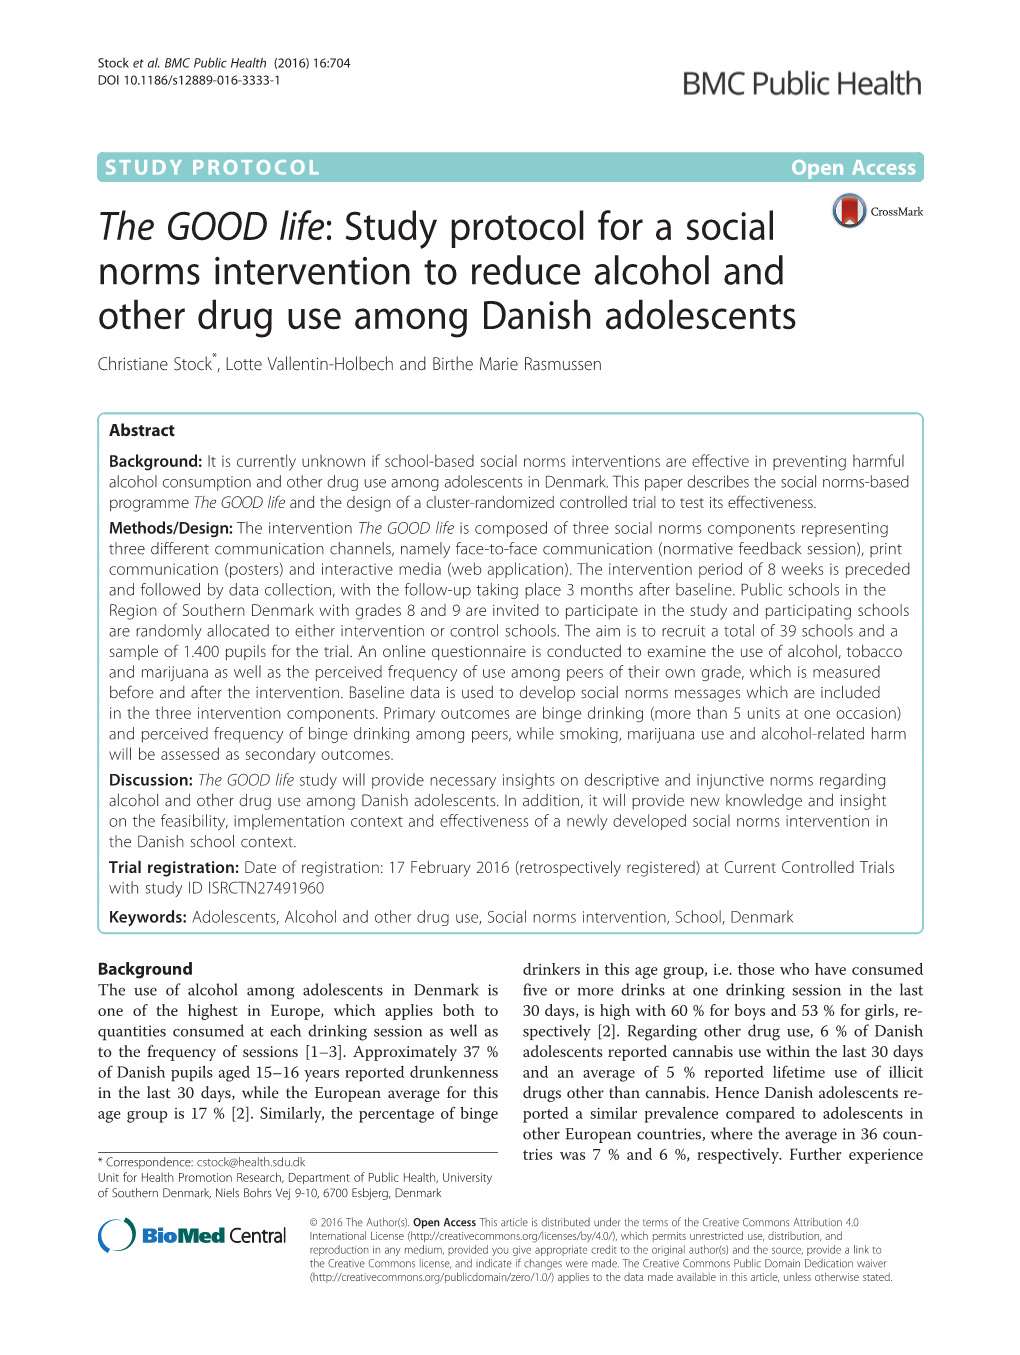 The GOOD Life: Study Protocol for a Social Norms Intervention to Reduce